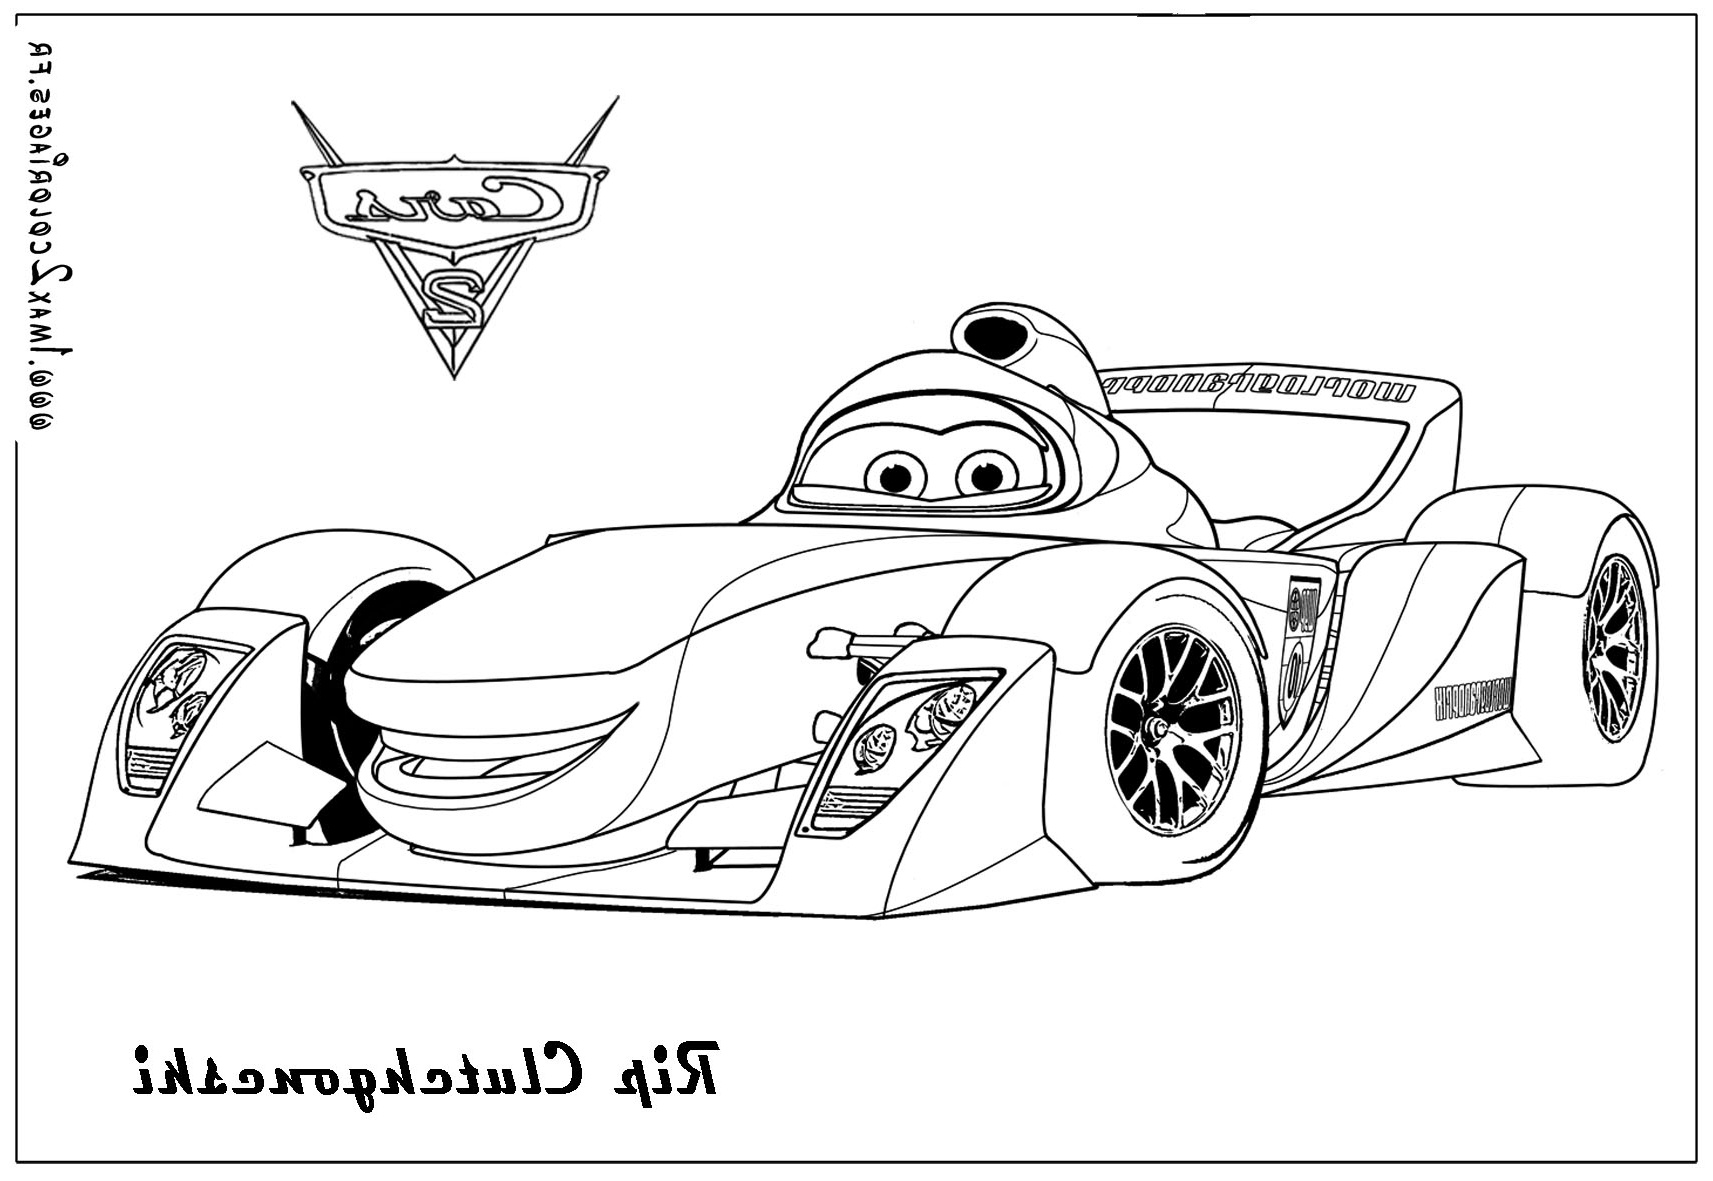 image=cars 2 coloriages cars2 9 1